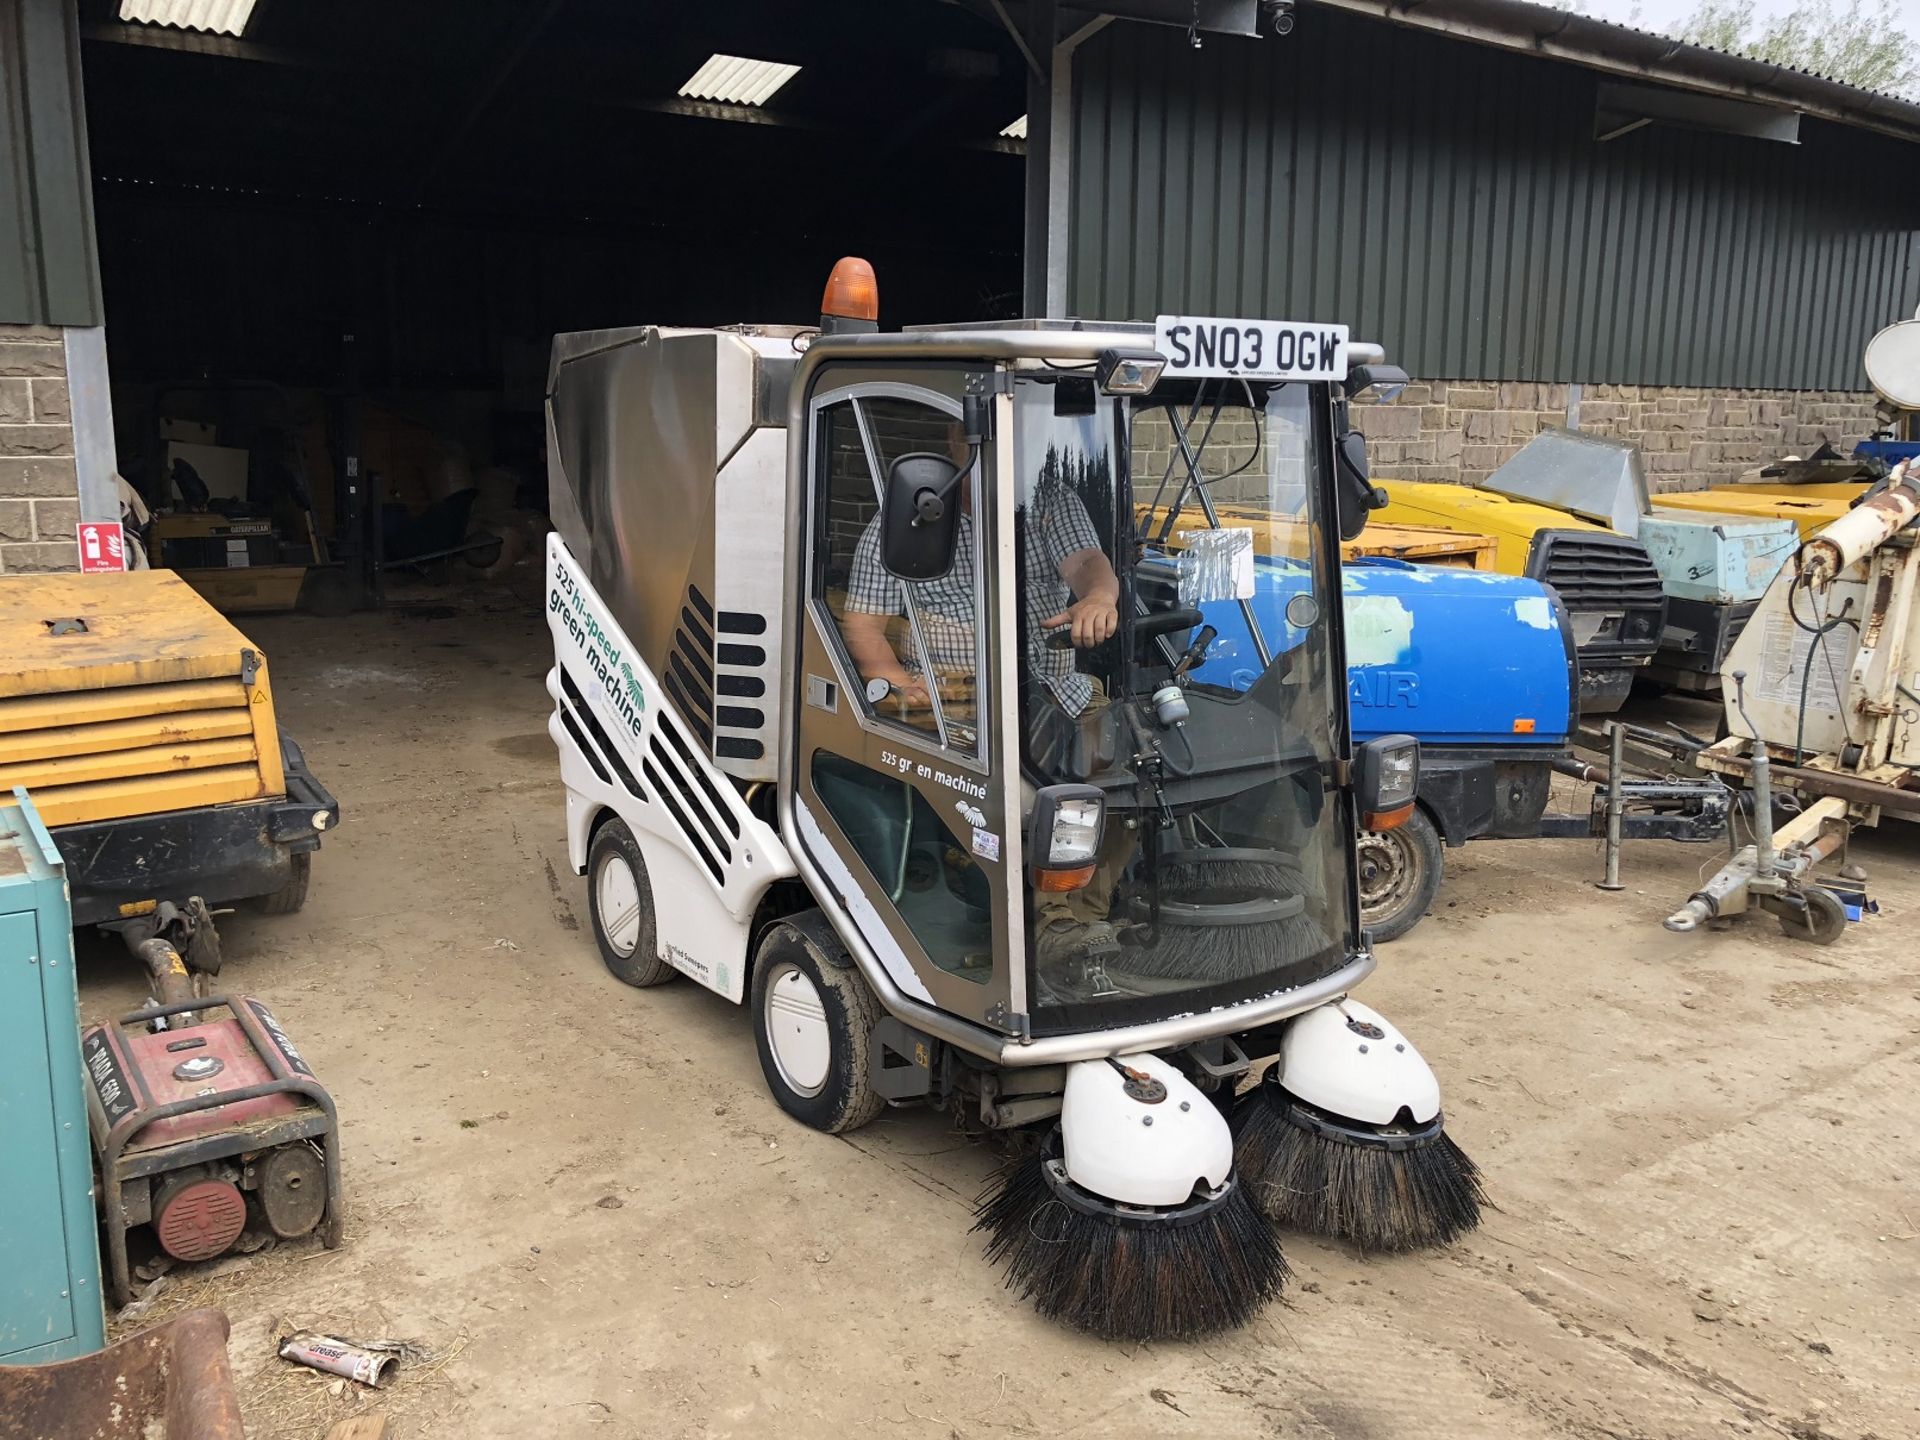 NEW TECHNOLOGY 525 HI-SPEED GREEN MACHINE ROAD SWEEPER, STARTS, RUNS AND SWEEPS *PLUS VAT*